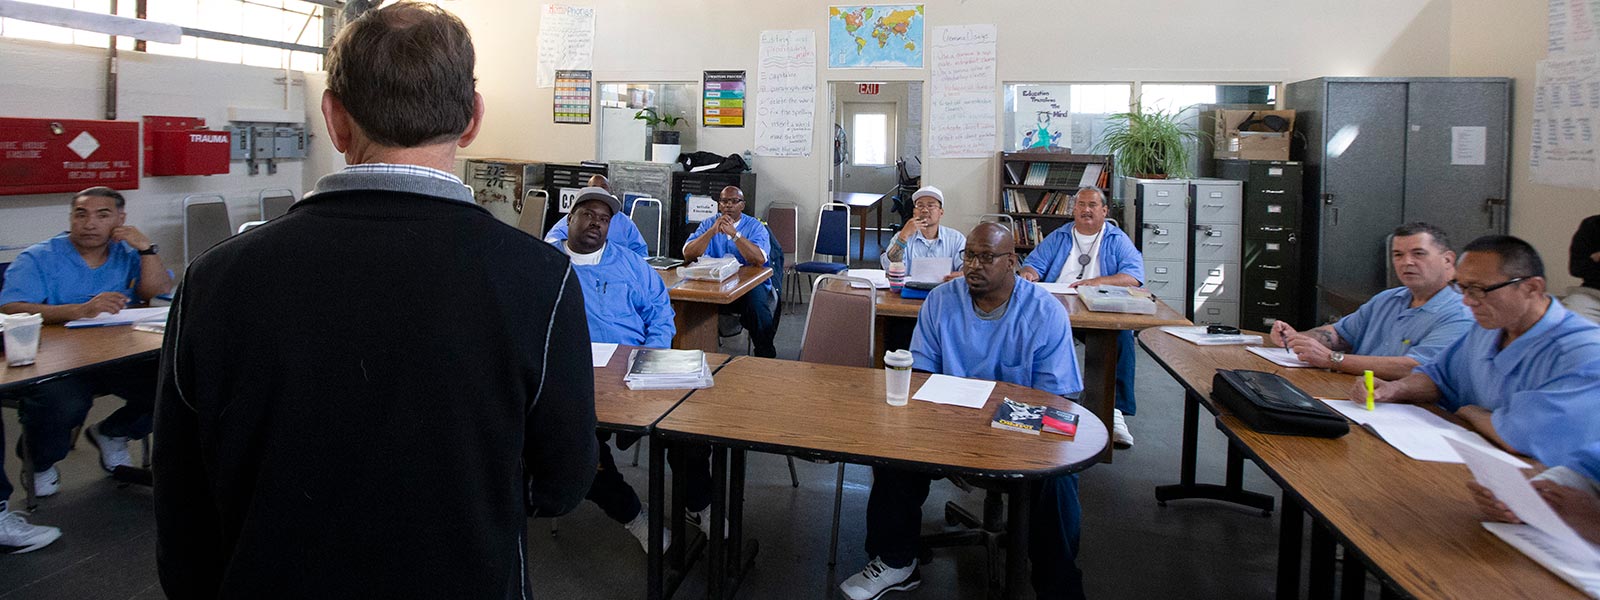 Classroom at San Quentin State Prison